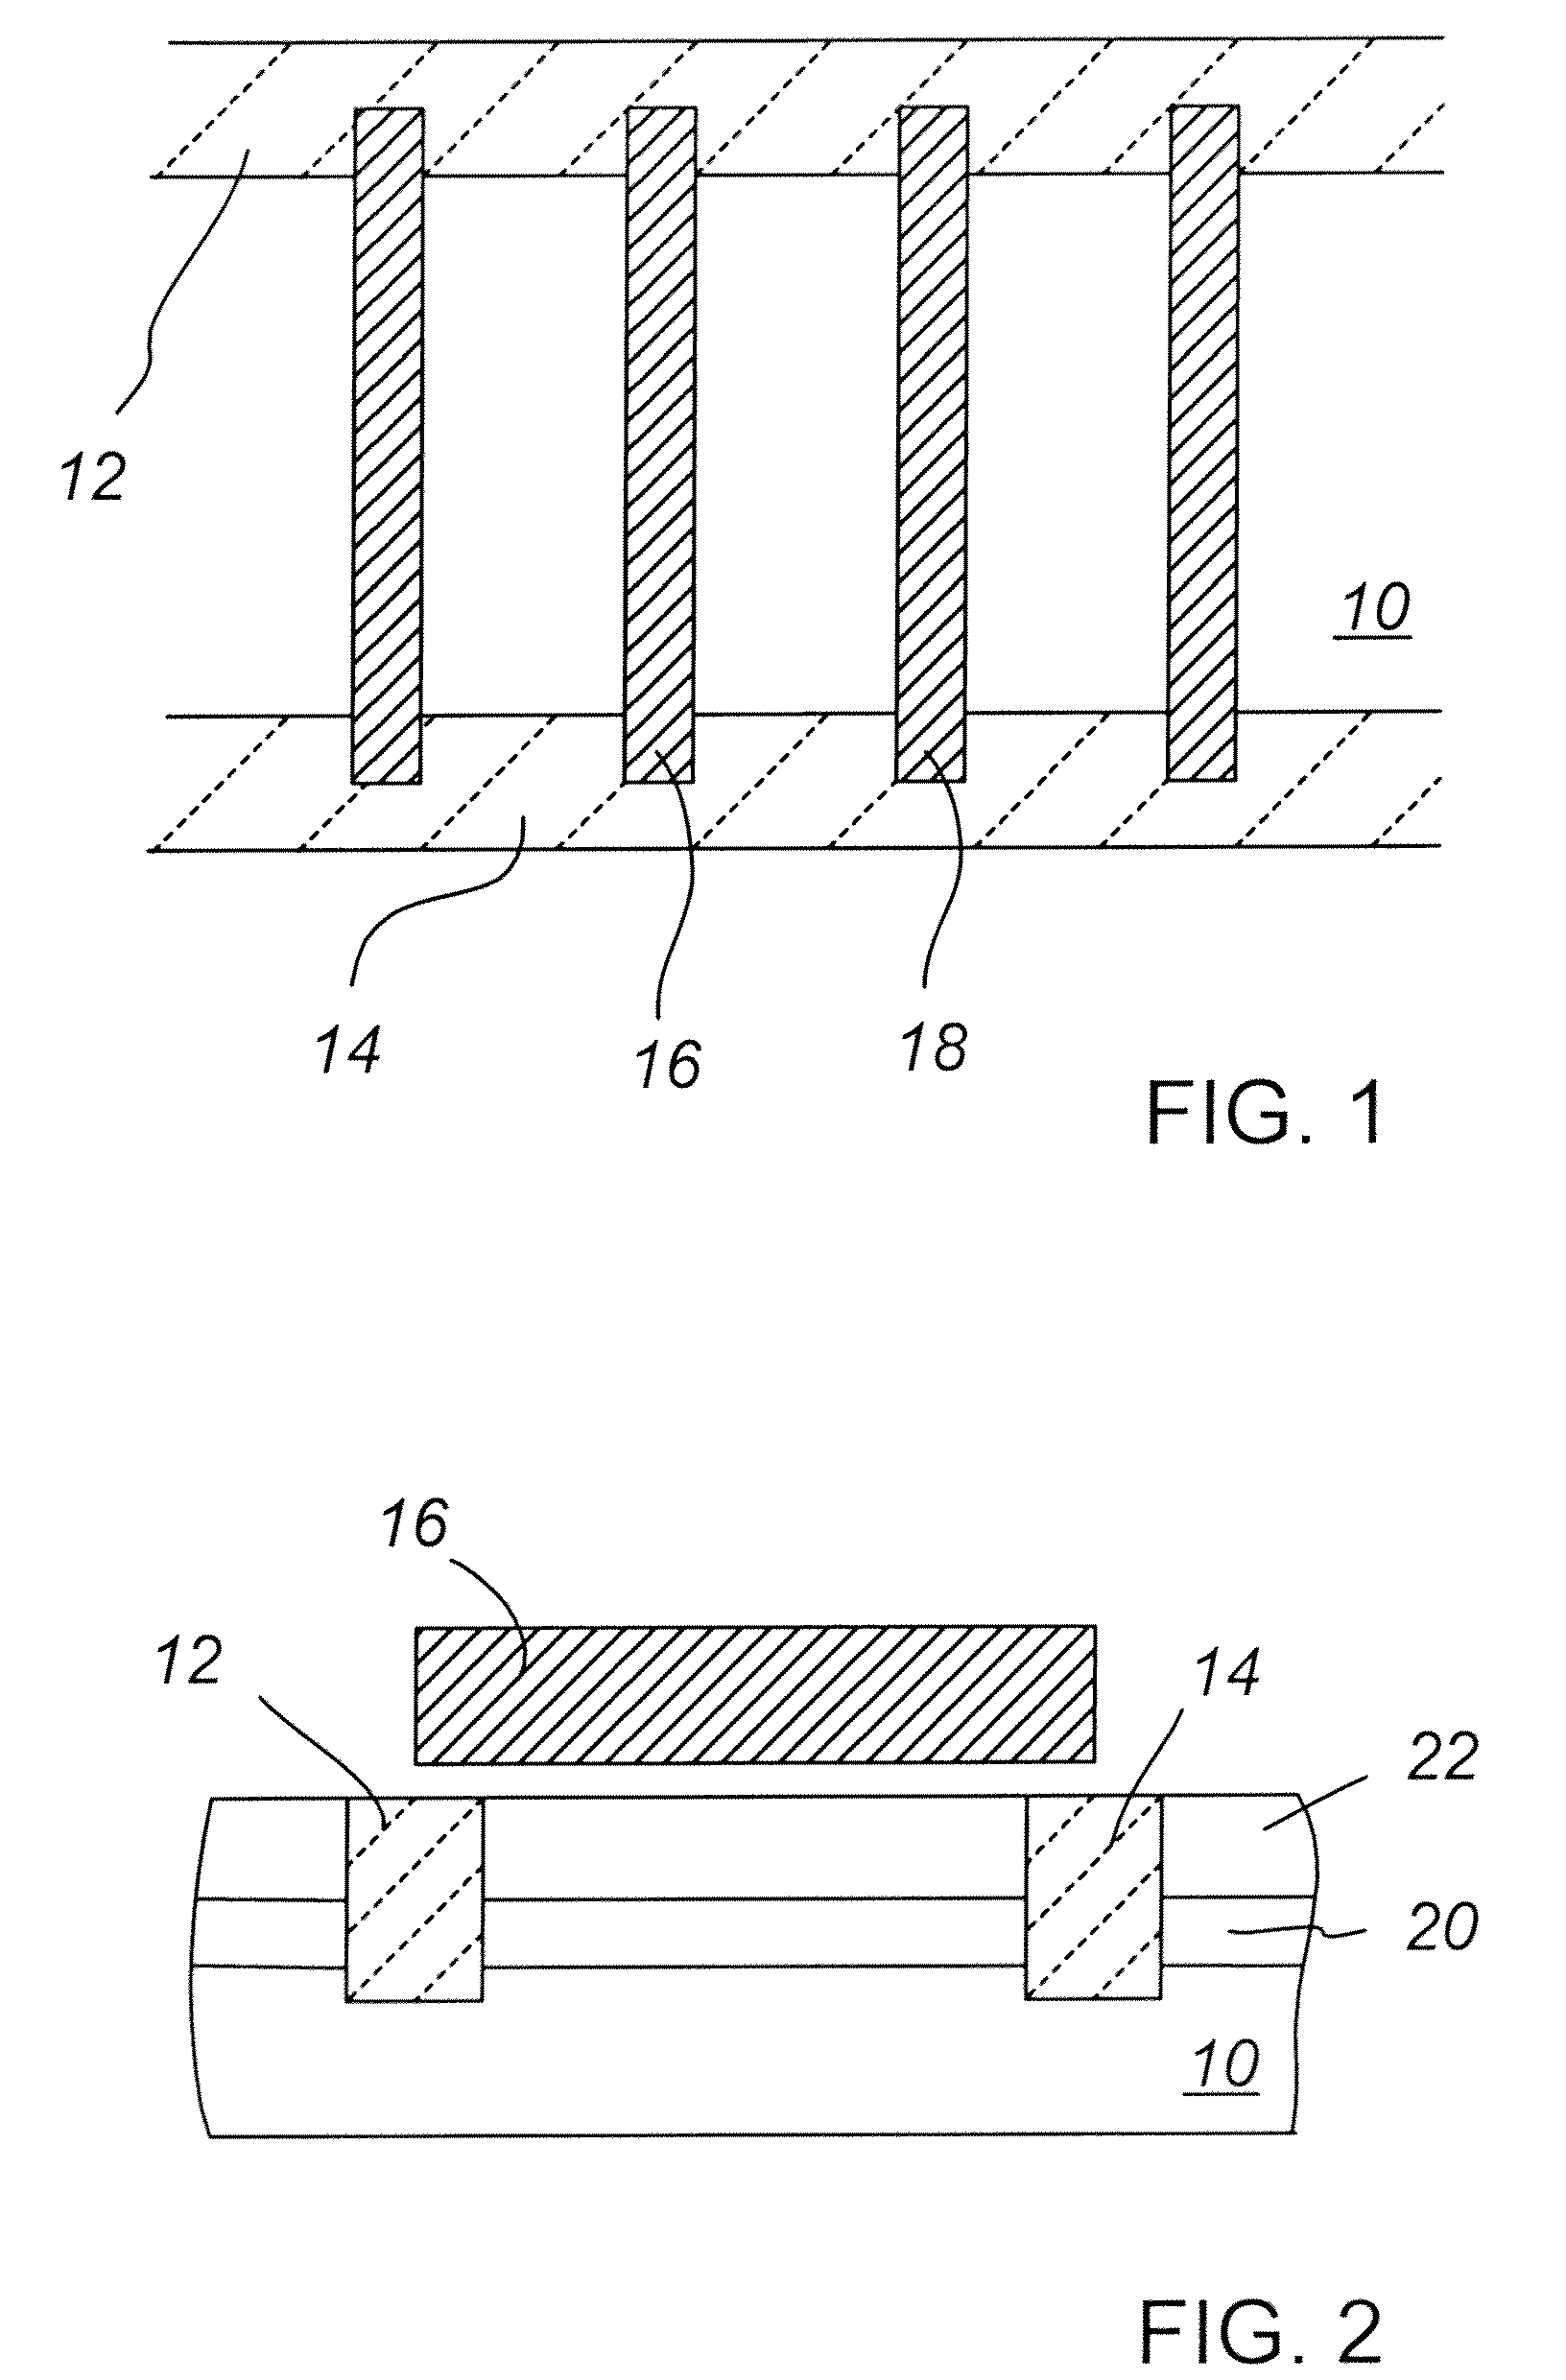 Biaxial strained field effect transistor devices